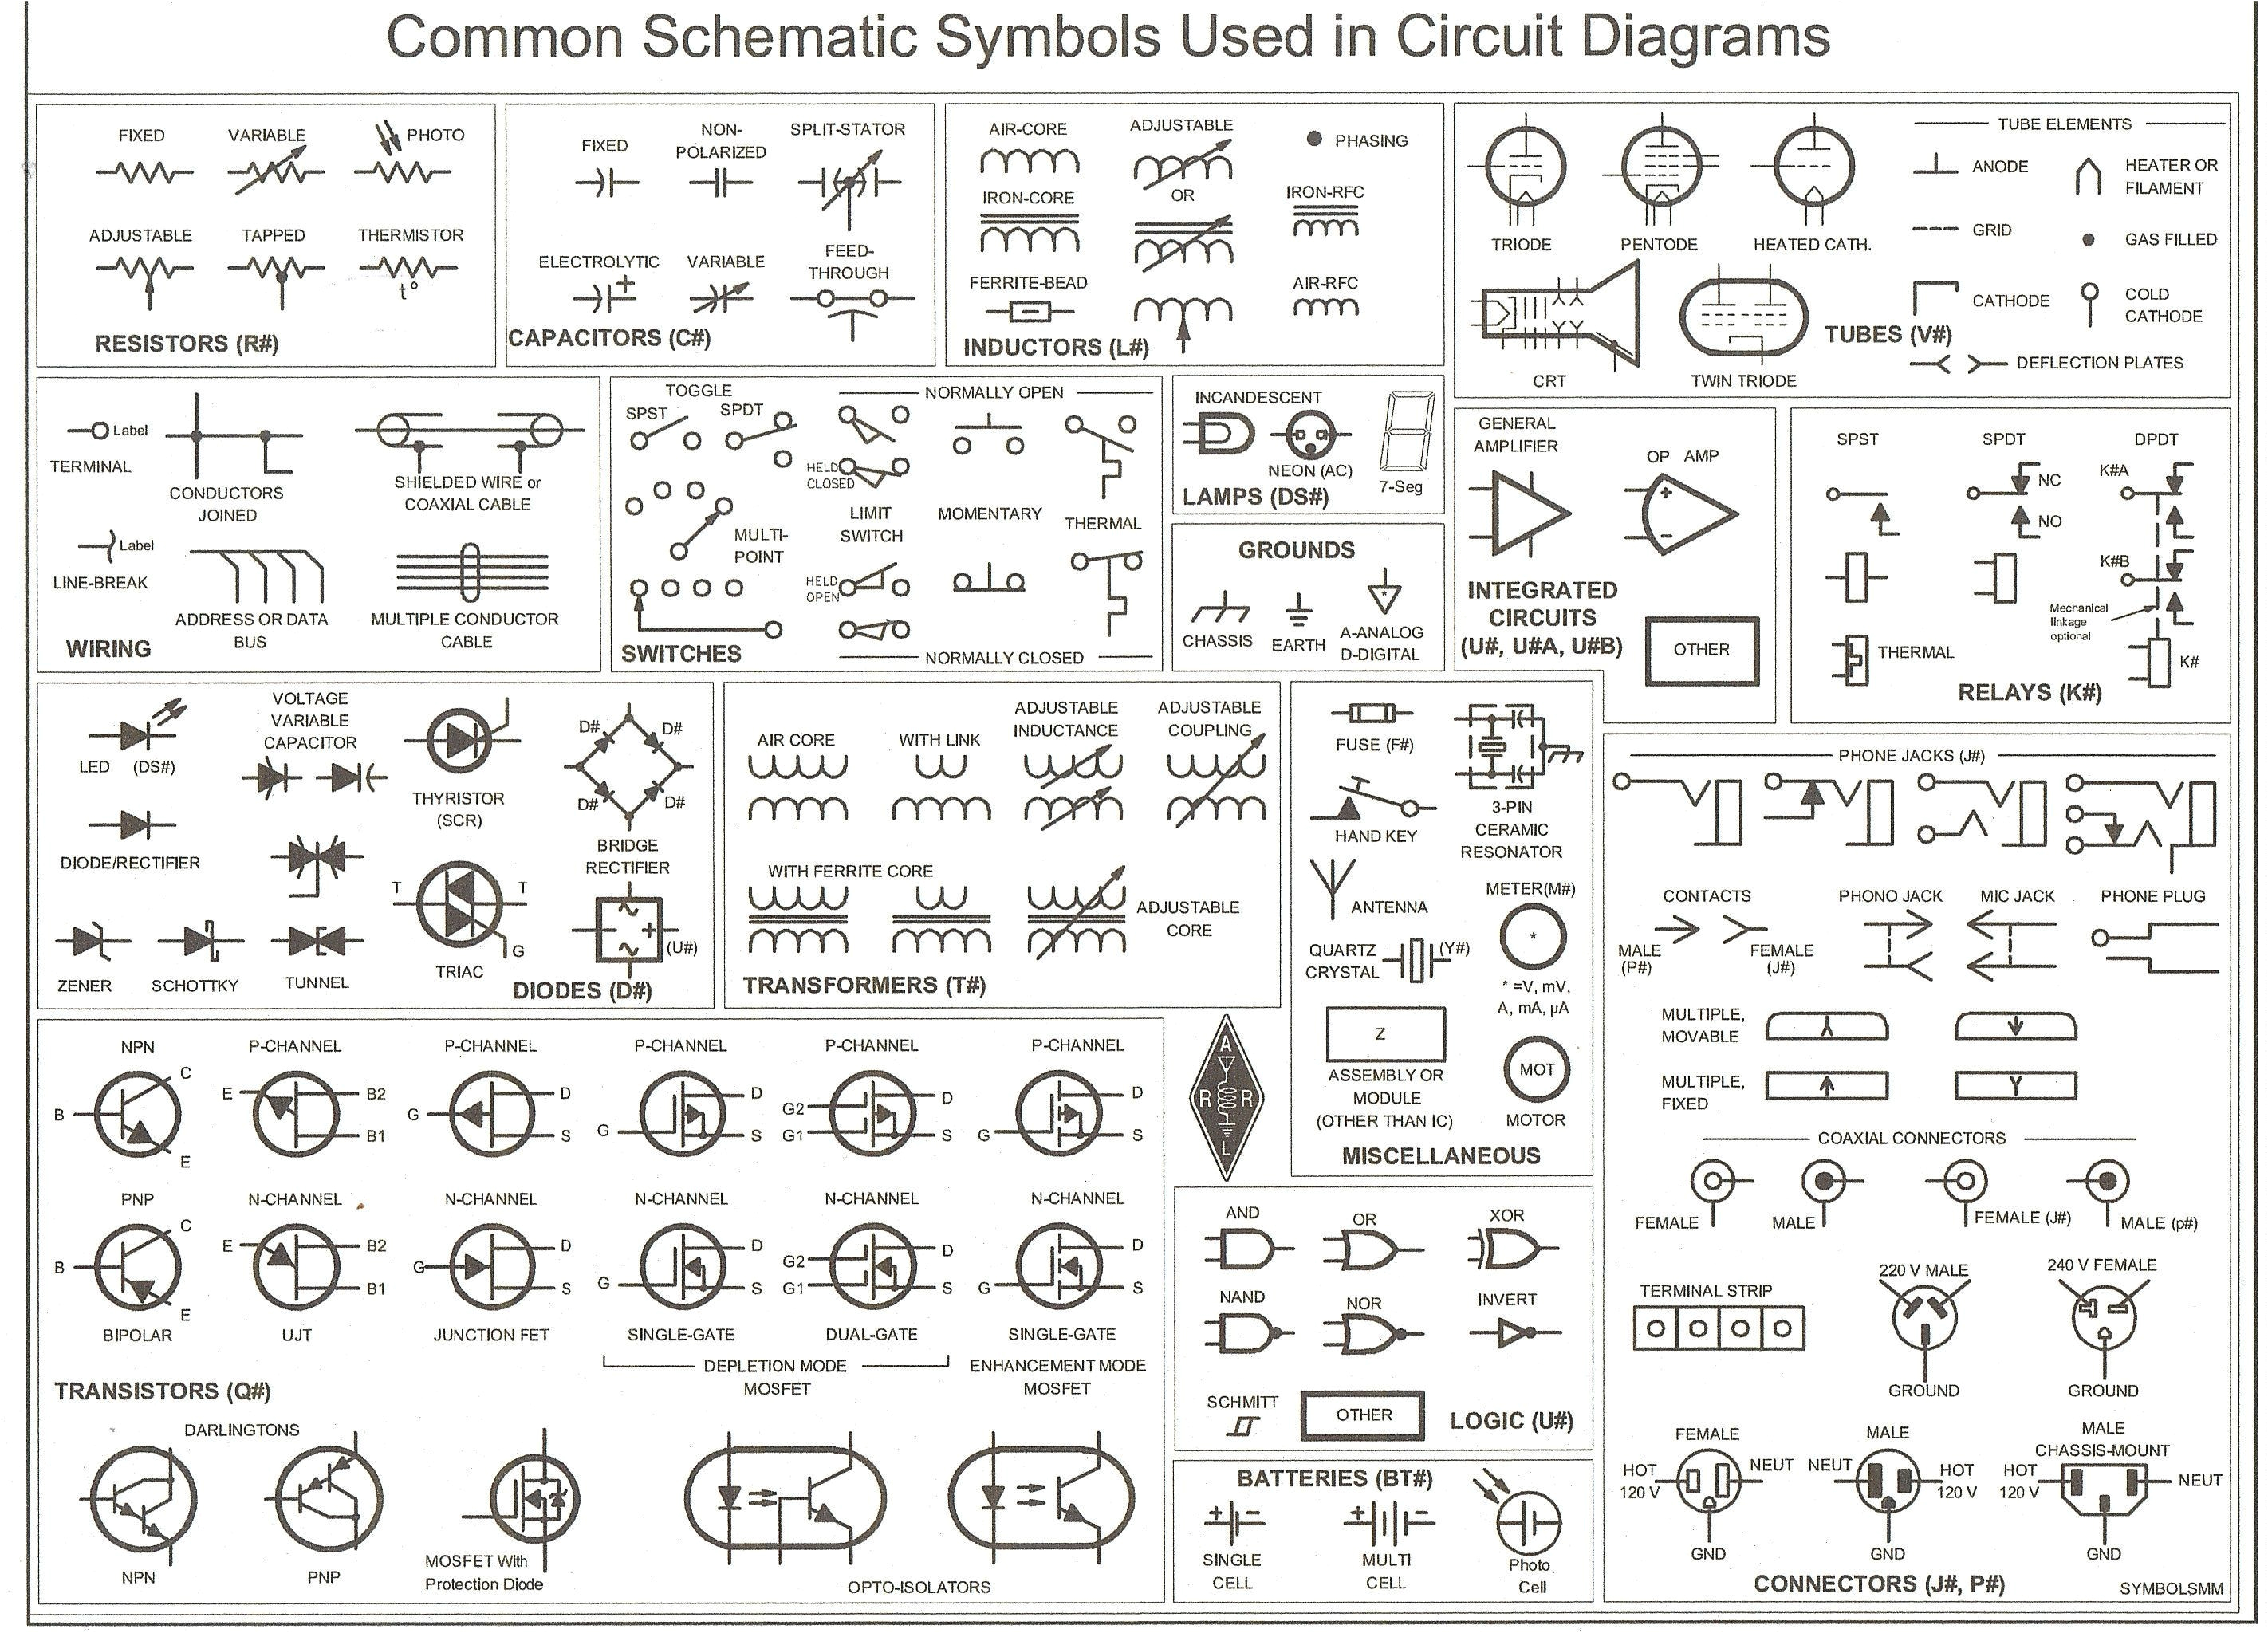 wiring schematic symbols as well electrical schematic diagram circuit switch likewise electrical circuit symbols on schematic